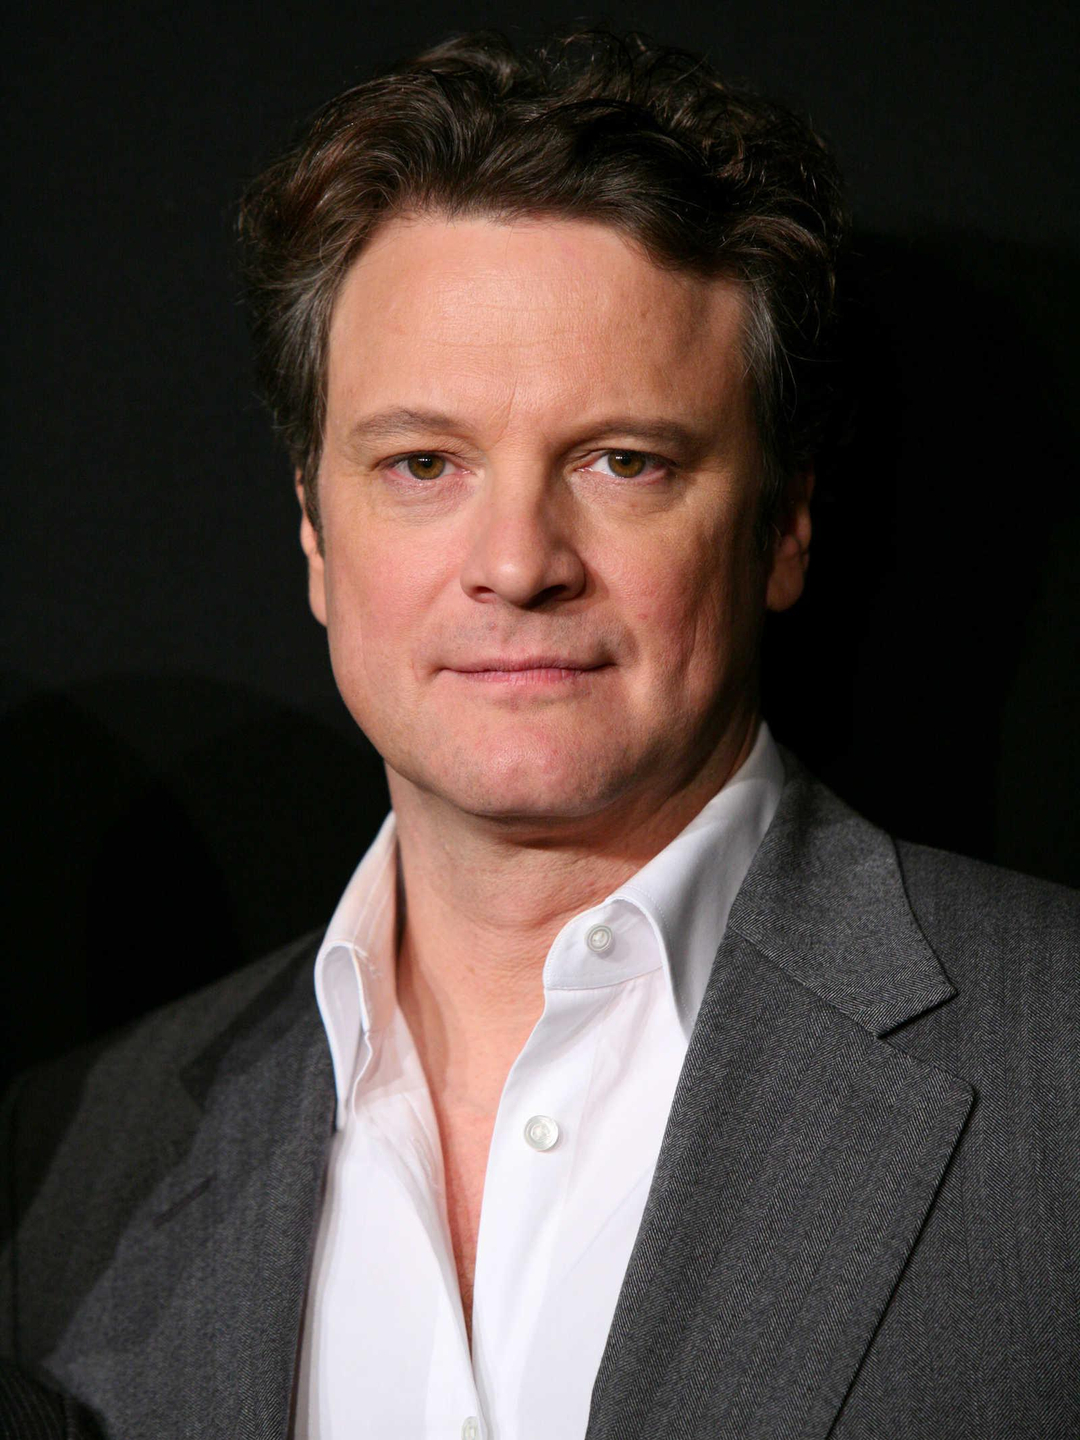 Colin Firth biography